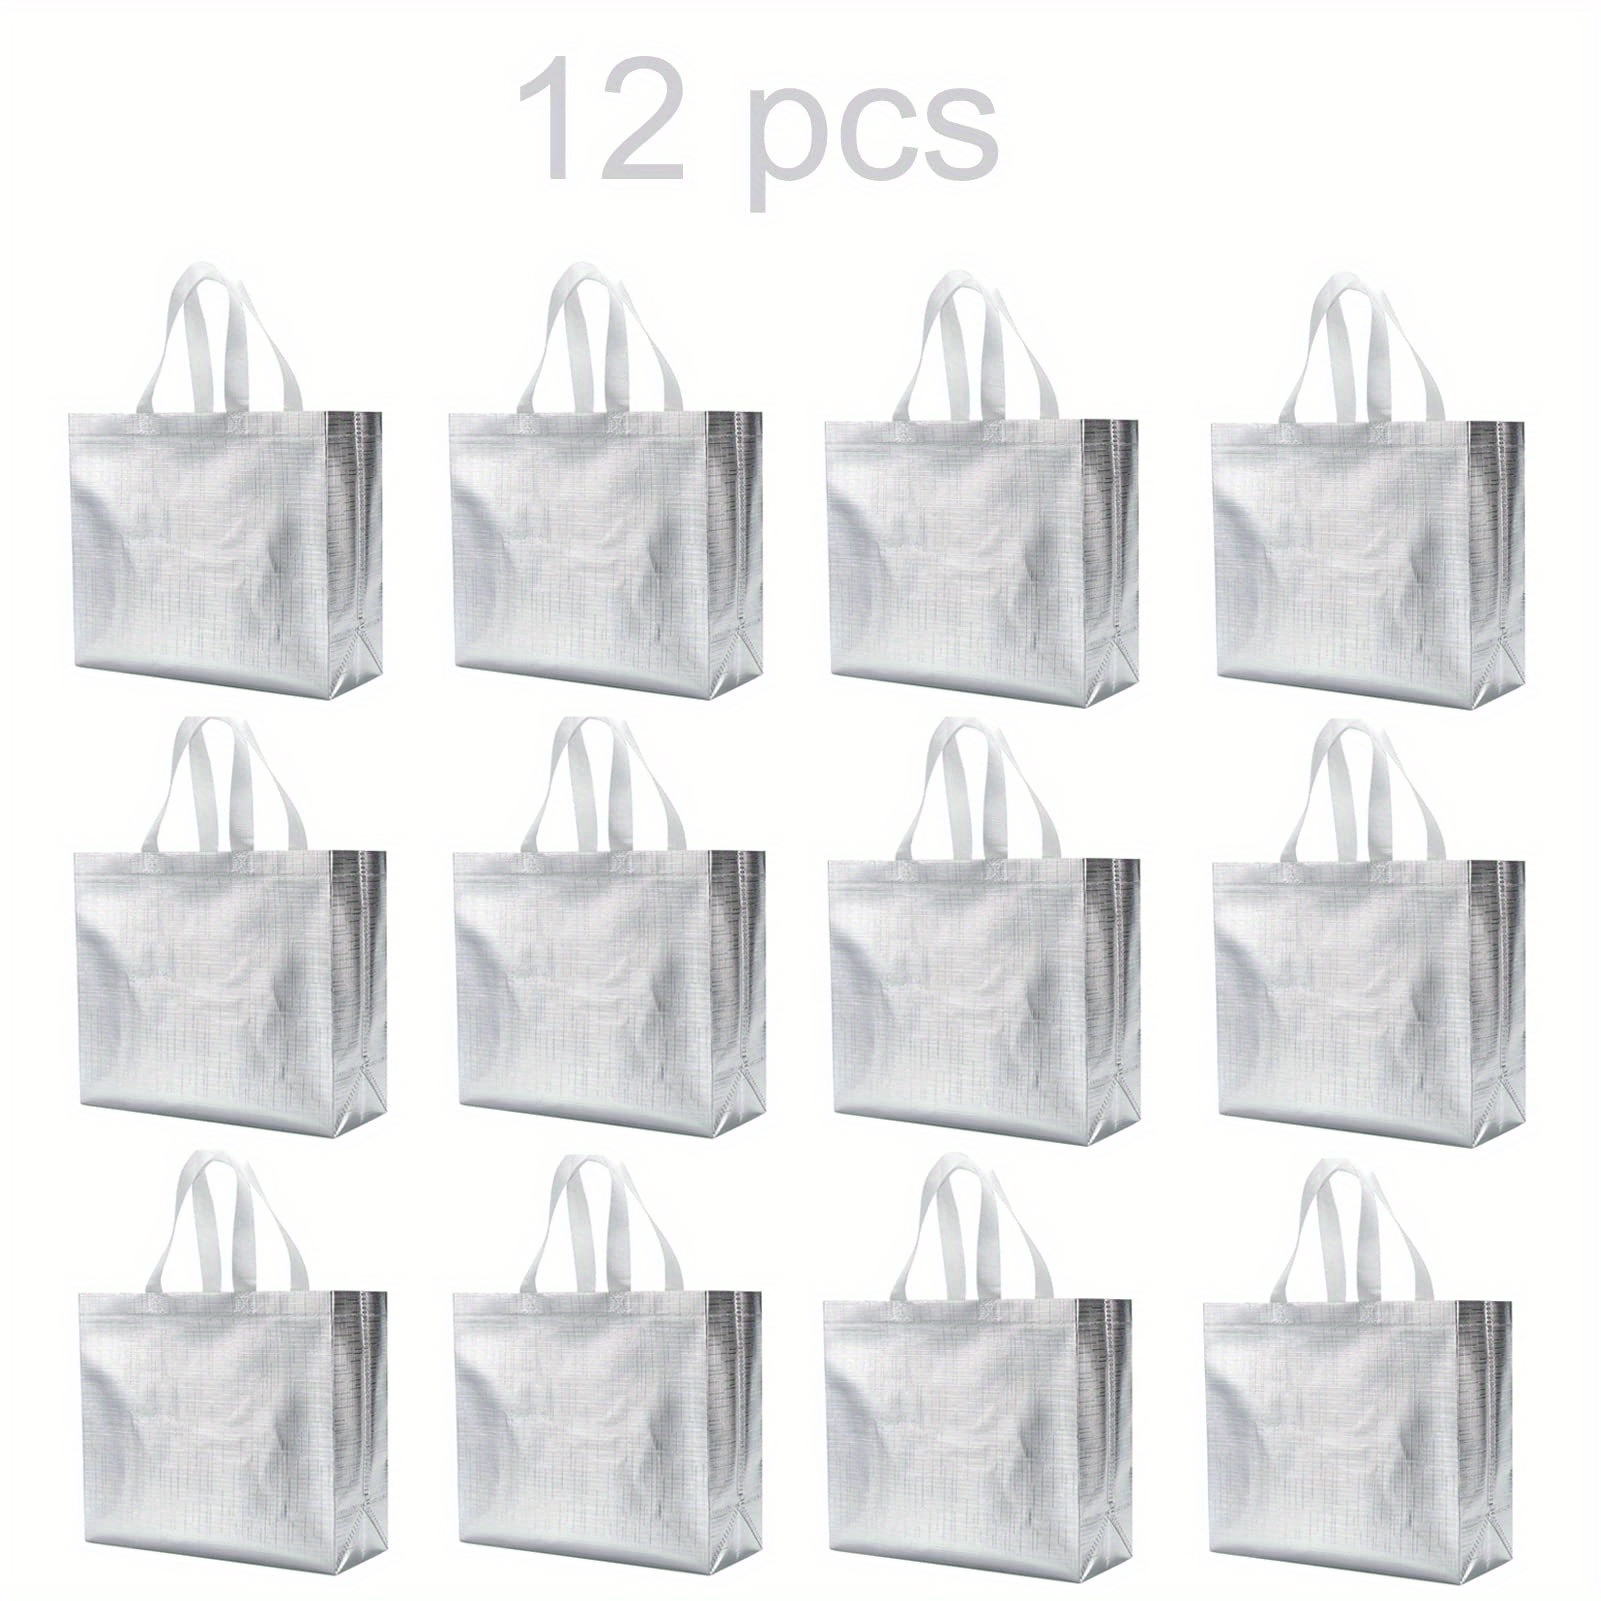  Sweetude 30 Pcs Thank You Gift Bags with Handles Bulk Reusable  Goodie Bag Non Woven Foldable Bag for Wedding Bridesmaid Gifts (White, 10 x  8 x 4 Inch) : Health & Household